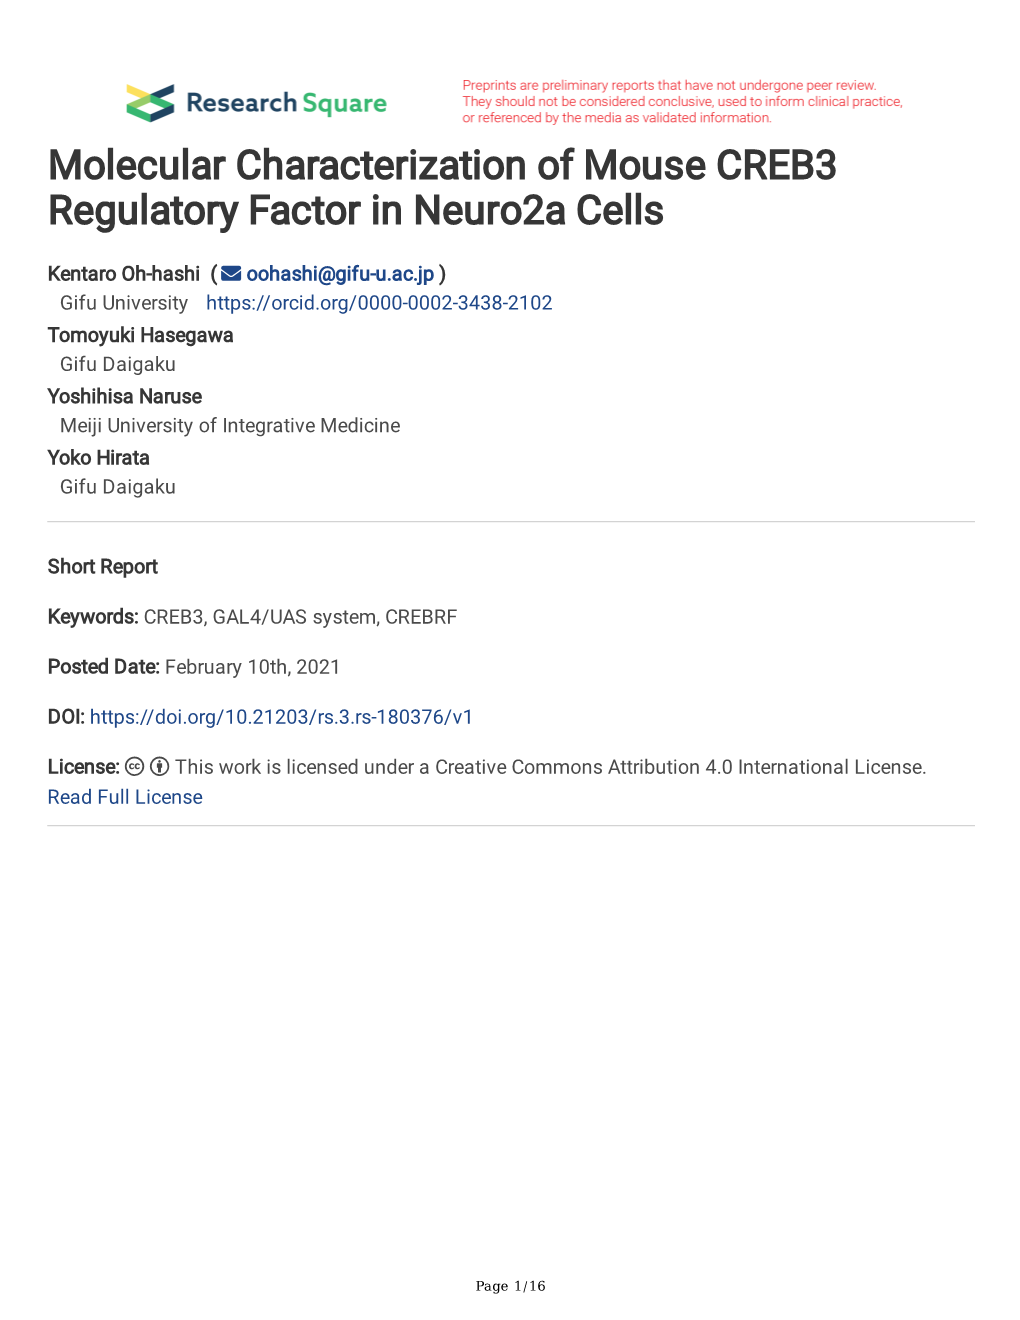 Molecular Characterization of Mouse CREB3 Regulatory Factor in Neuro2a Cells